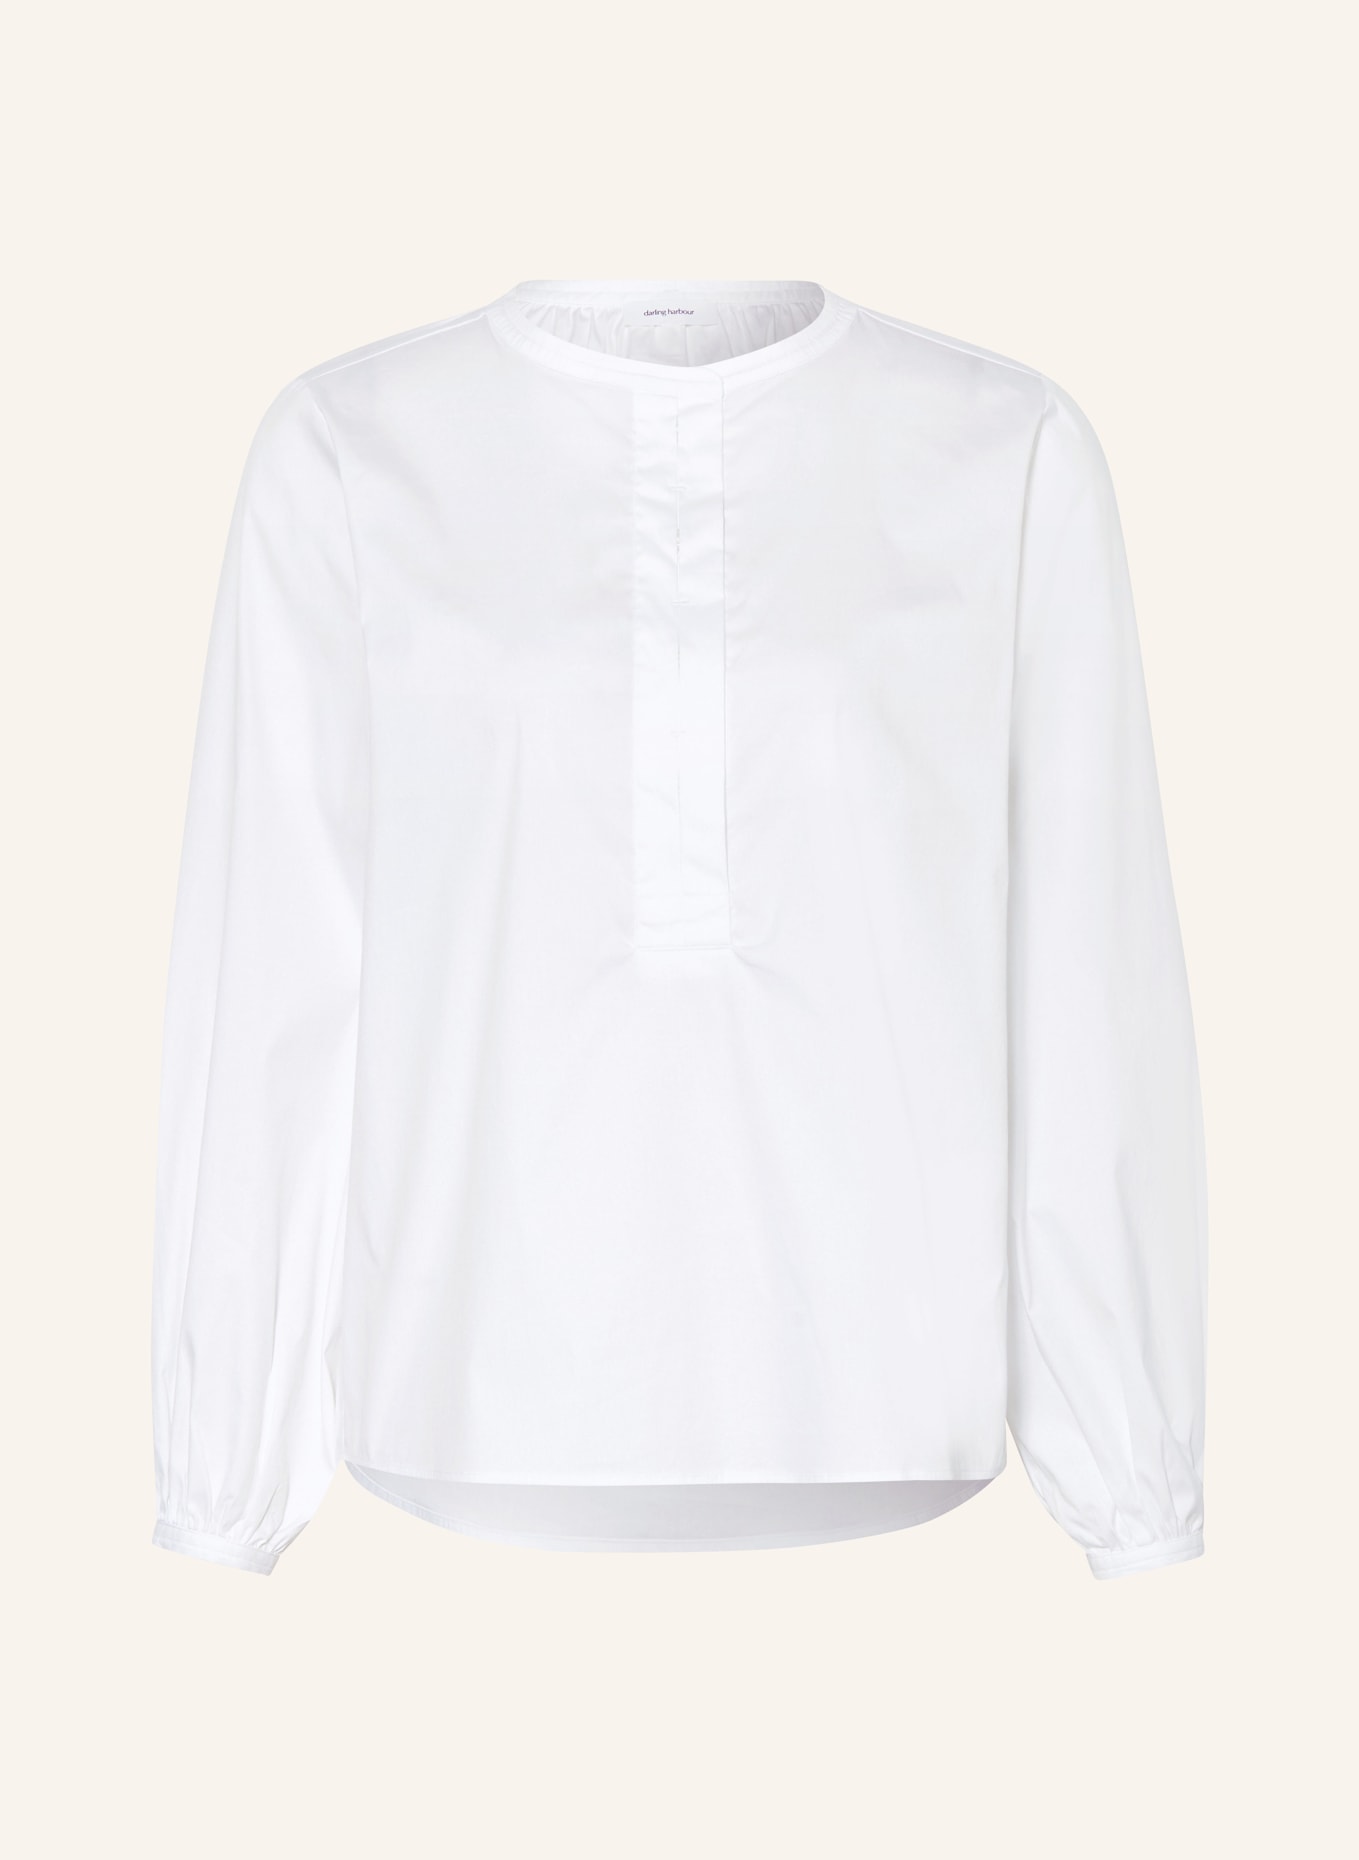 darling harbour Shirt blouse, Color: WEISS (Image 1)